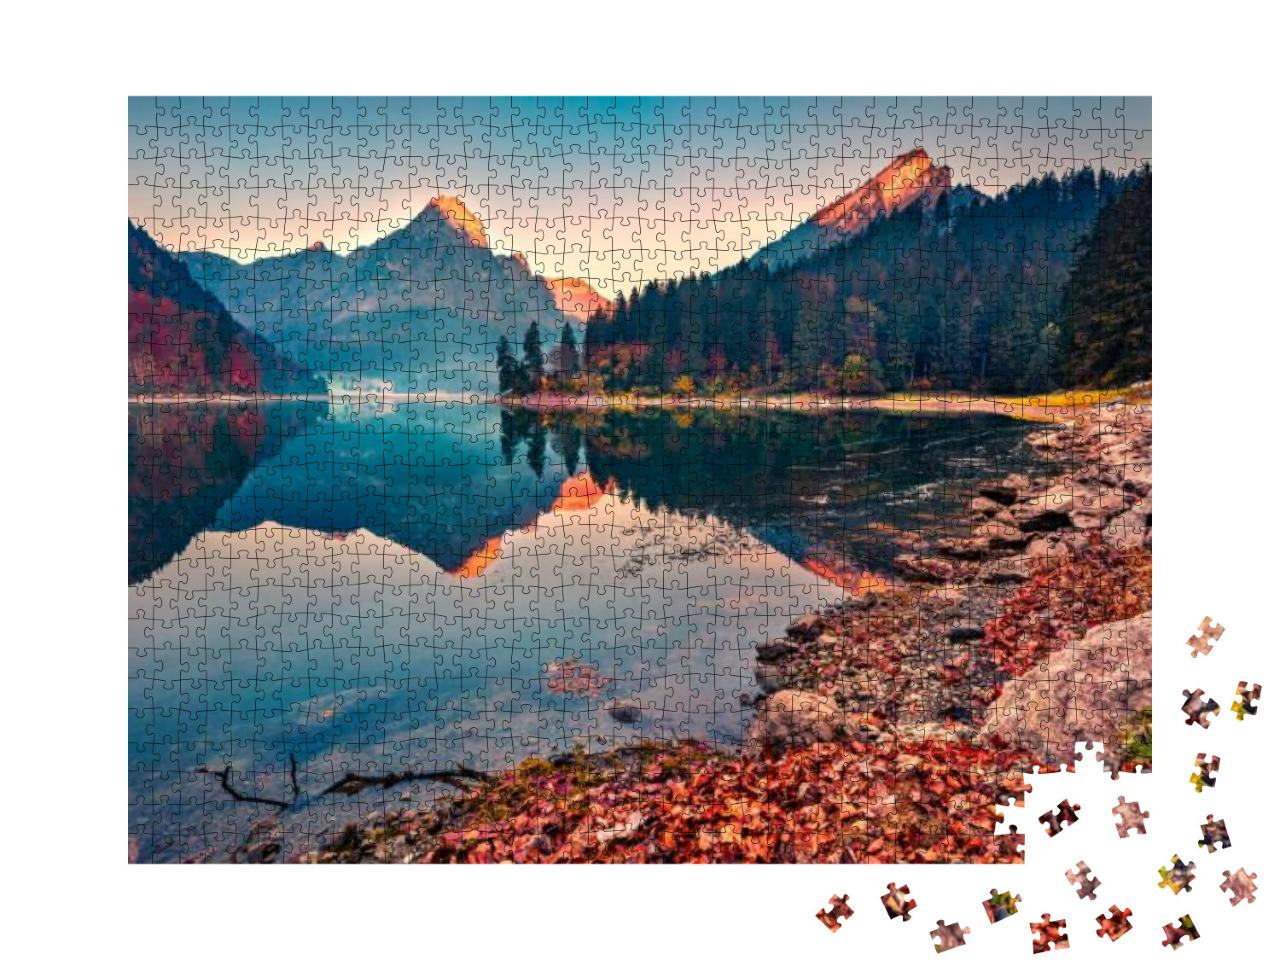 Two Mountain Peaks Are Reflected in the Calm Surface of t... Jigsaw Puzzle with 1000 pieces